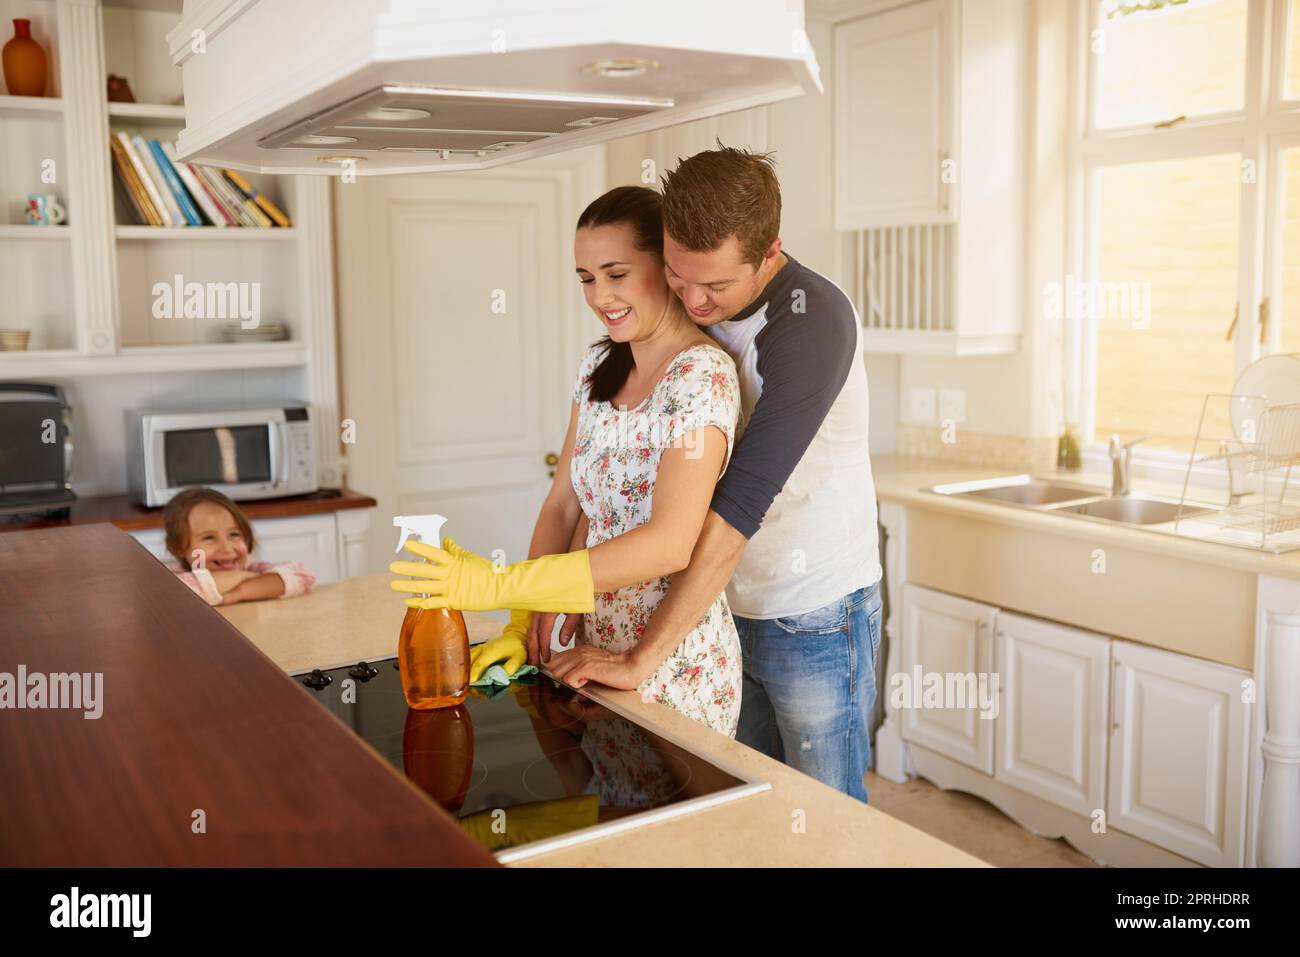 Sharing a moment. a happy family standing in a kitchen. Stock Photo